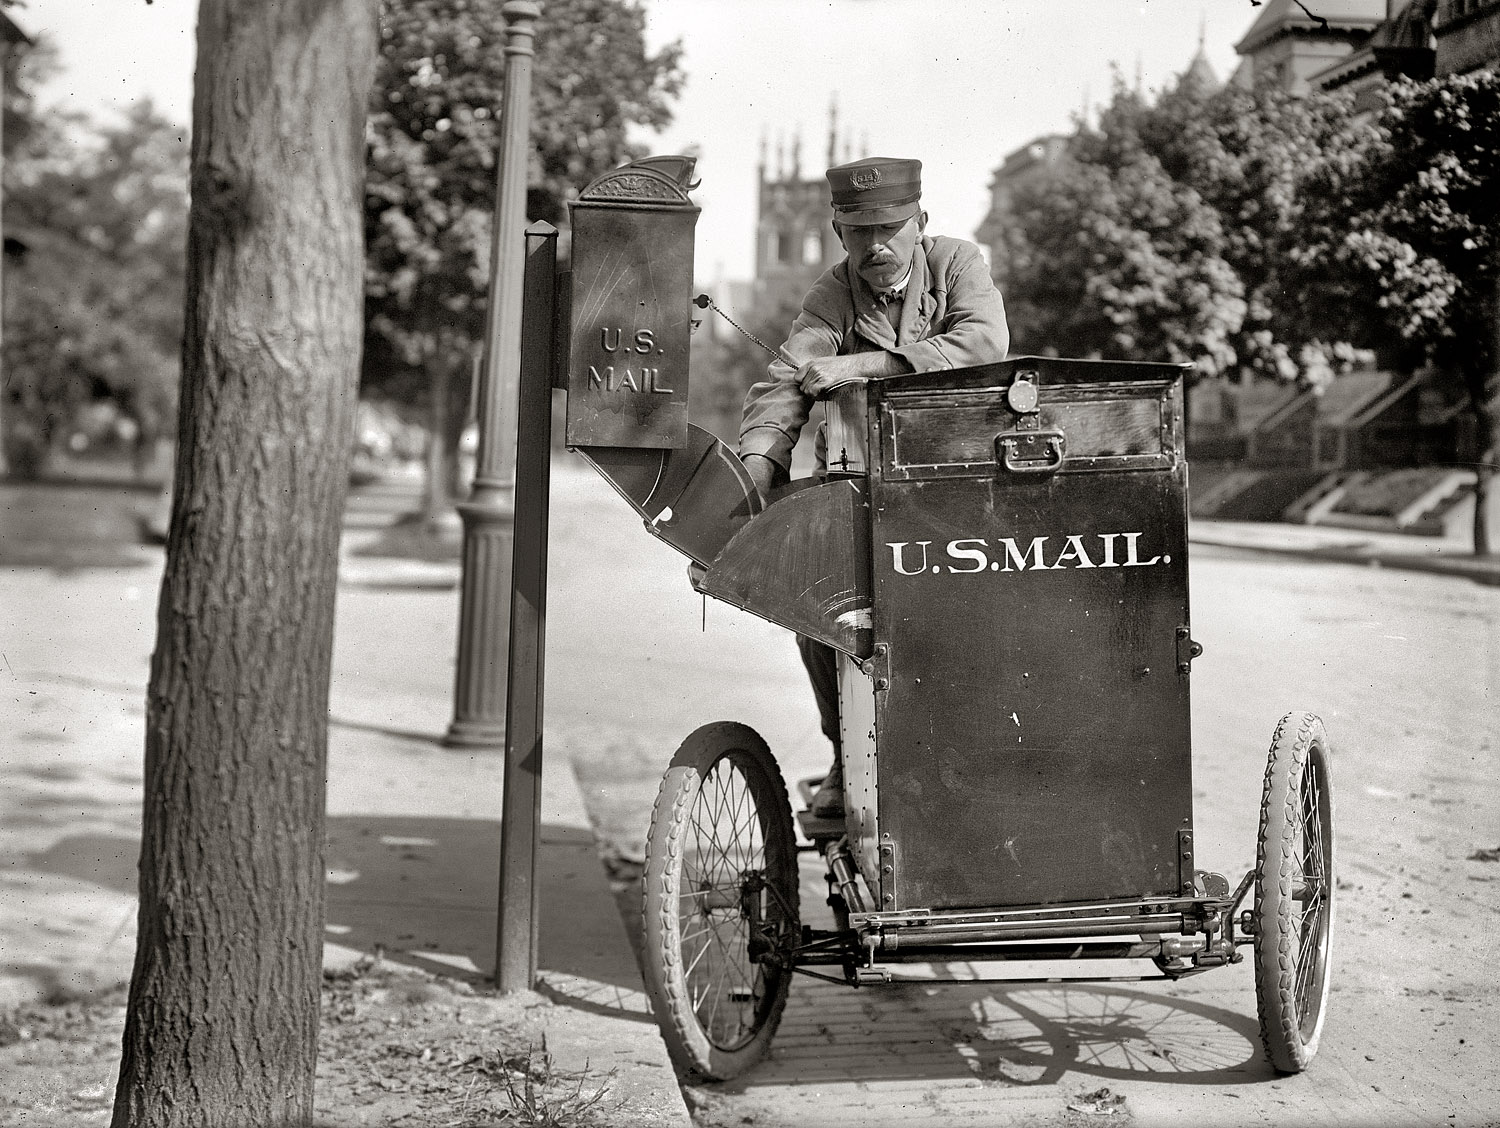 Washington, D.C. "Post Office Department. Motorcycle postman. 1912." S14 collects the mail. Harris & Ewing Collection glass negative. View full size.